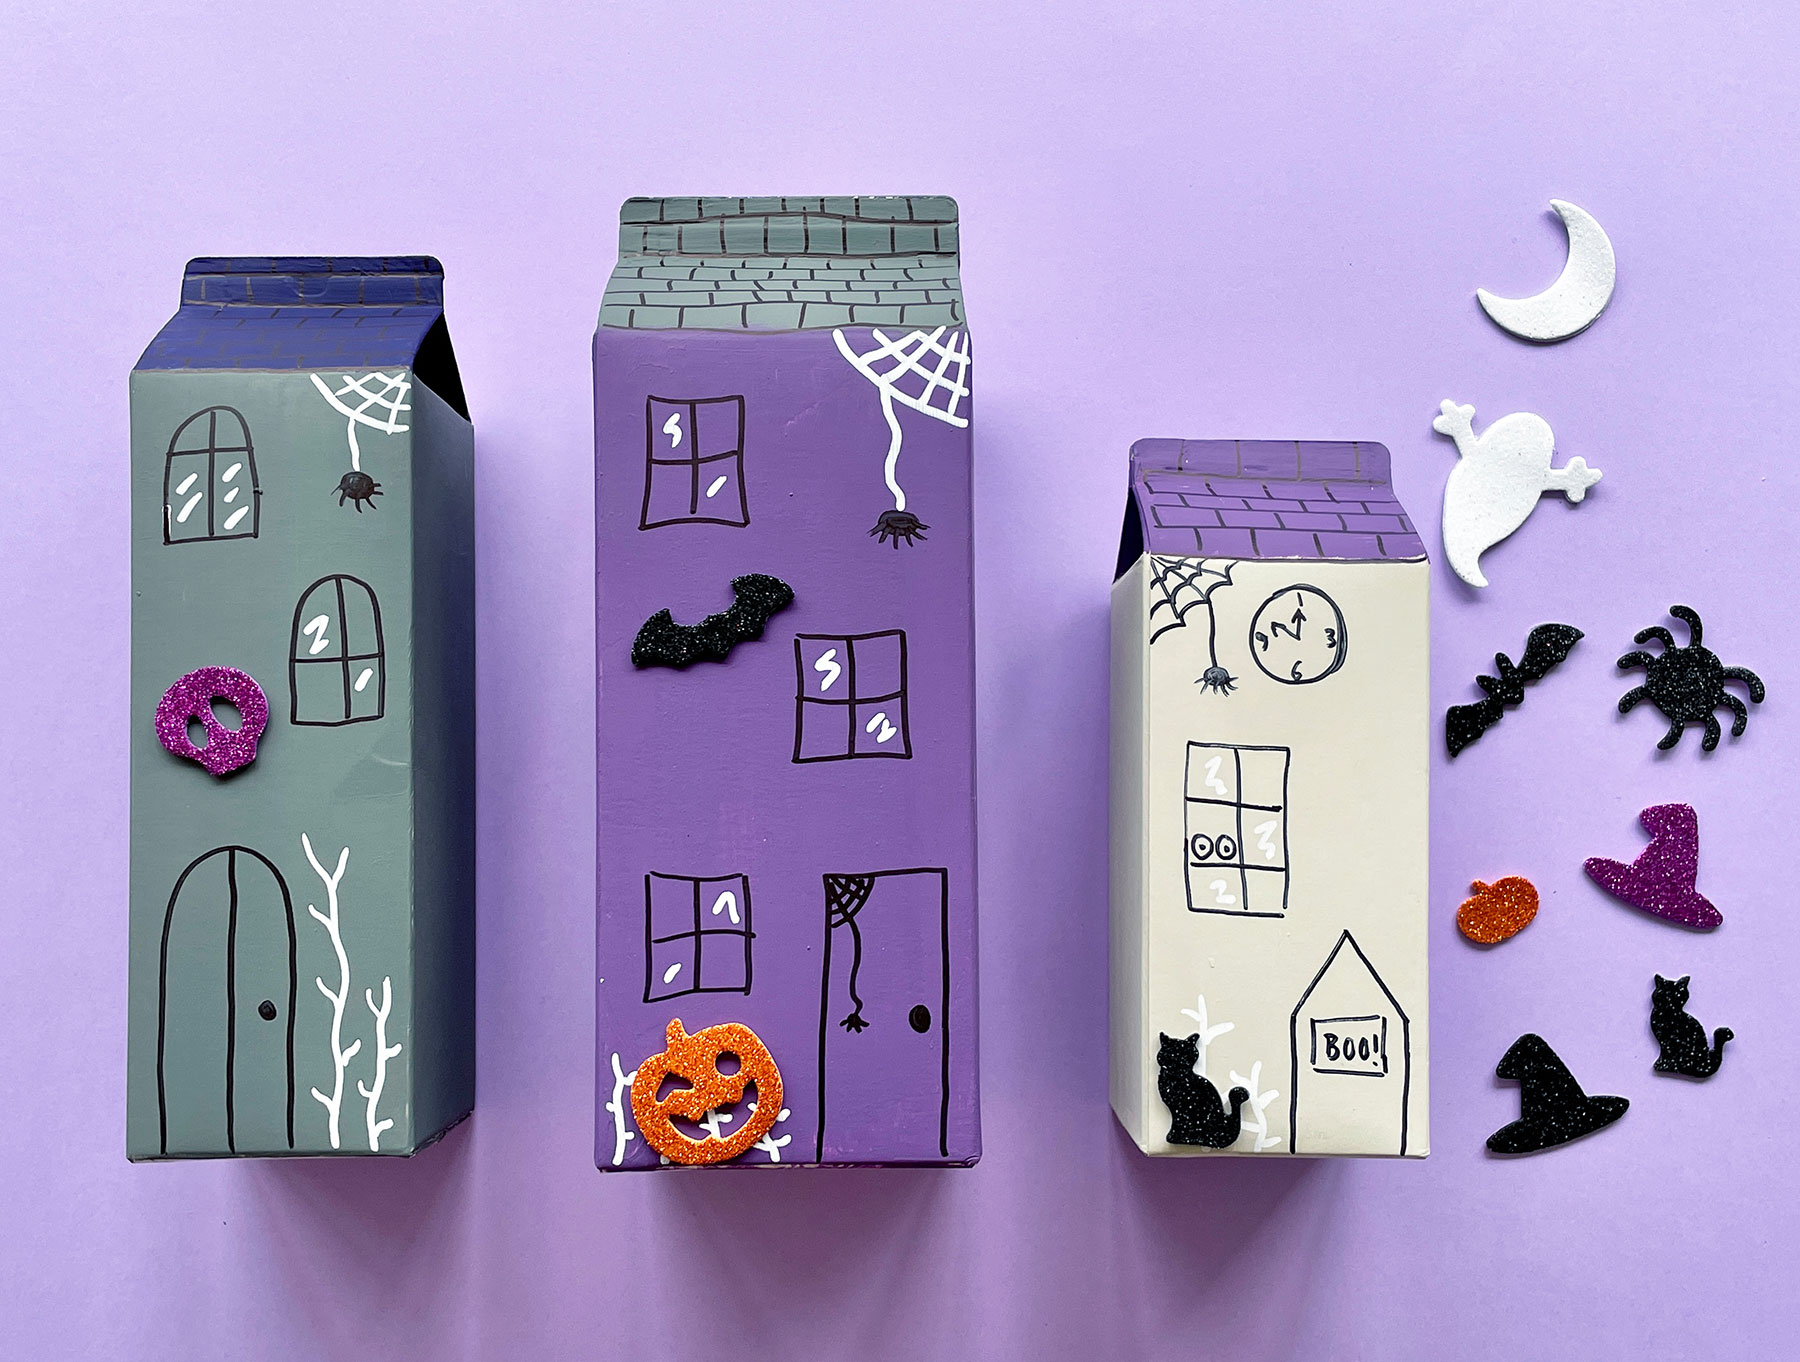 A photo of three cartons, painted to look like houses having foam stickers stuck onto them